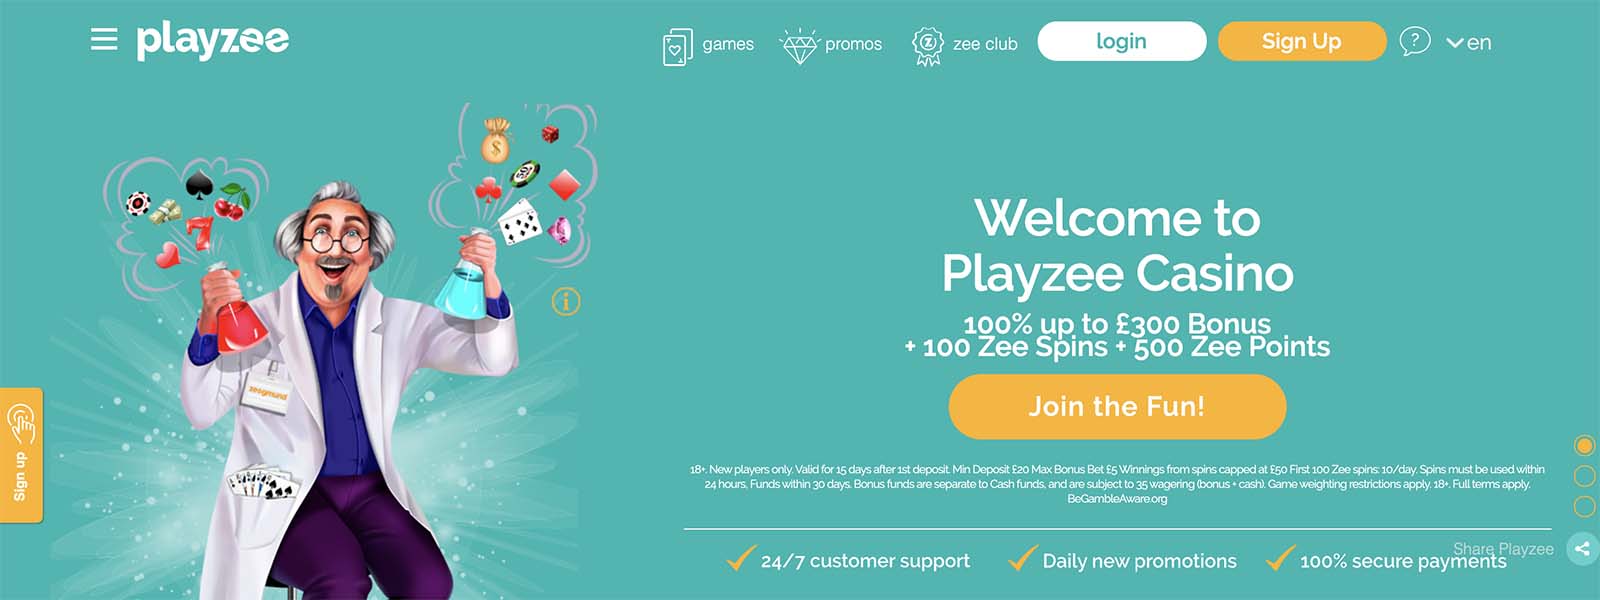 Pavilion playzee casino review 2020 claim 100% up to dollar300 more Seven Larry online best slots